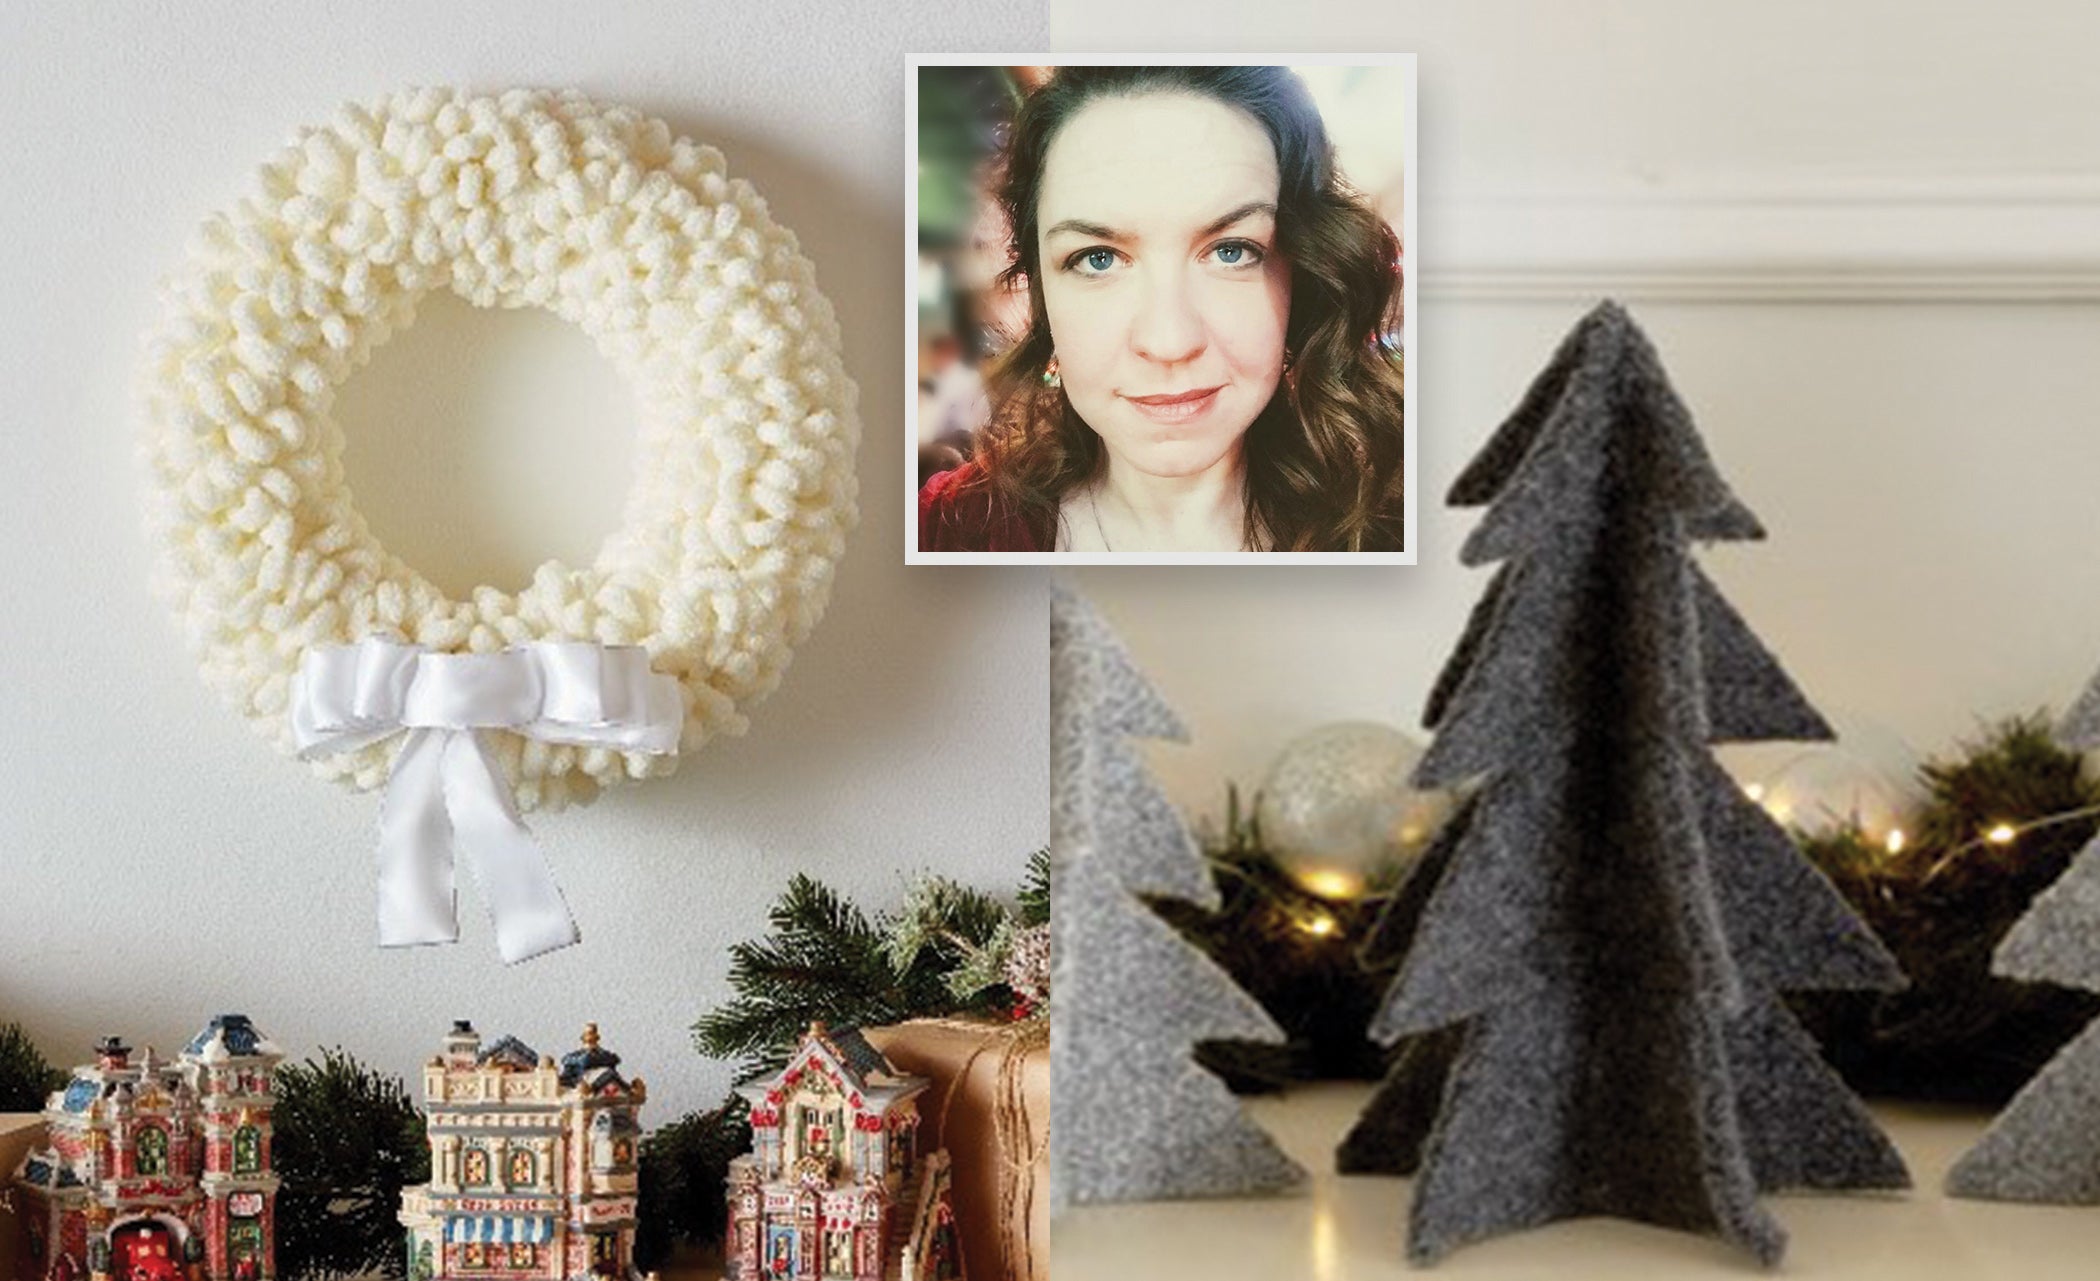 Image of Top 7 Holiday Trends - Moogly thumbnail